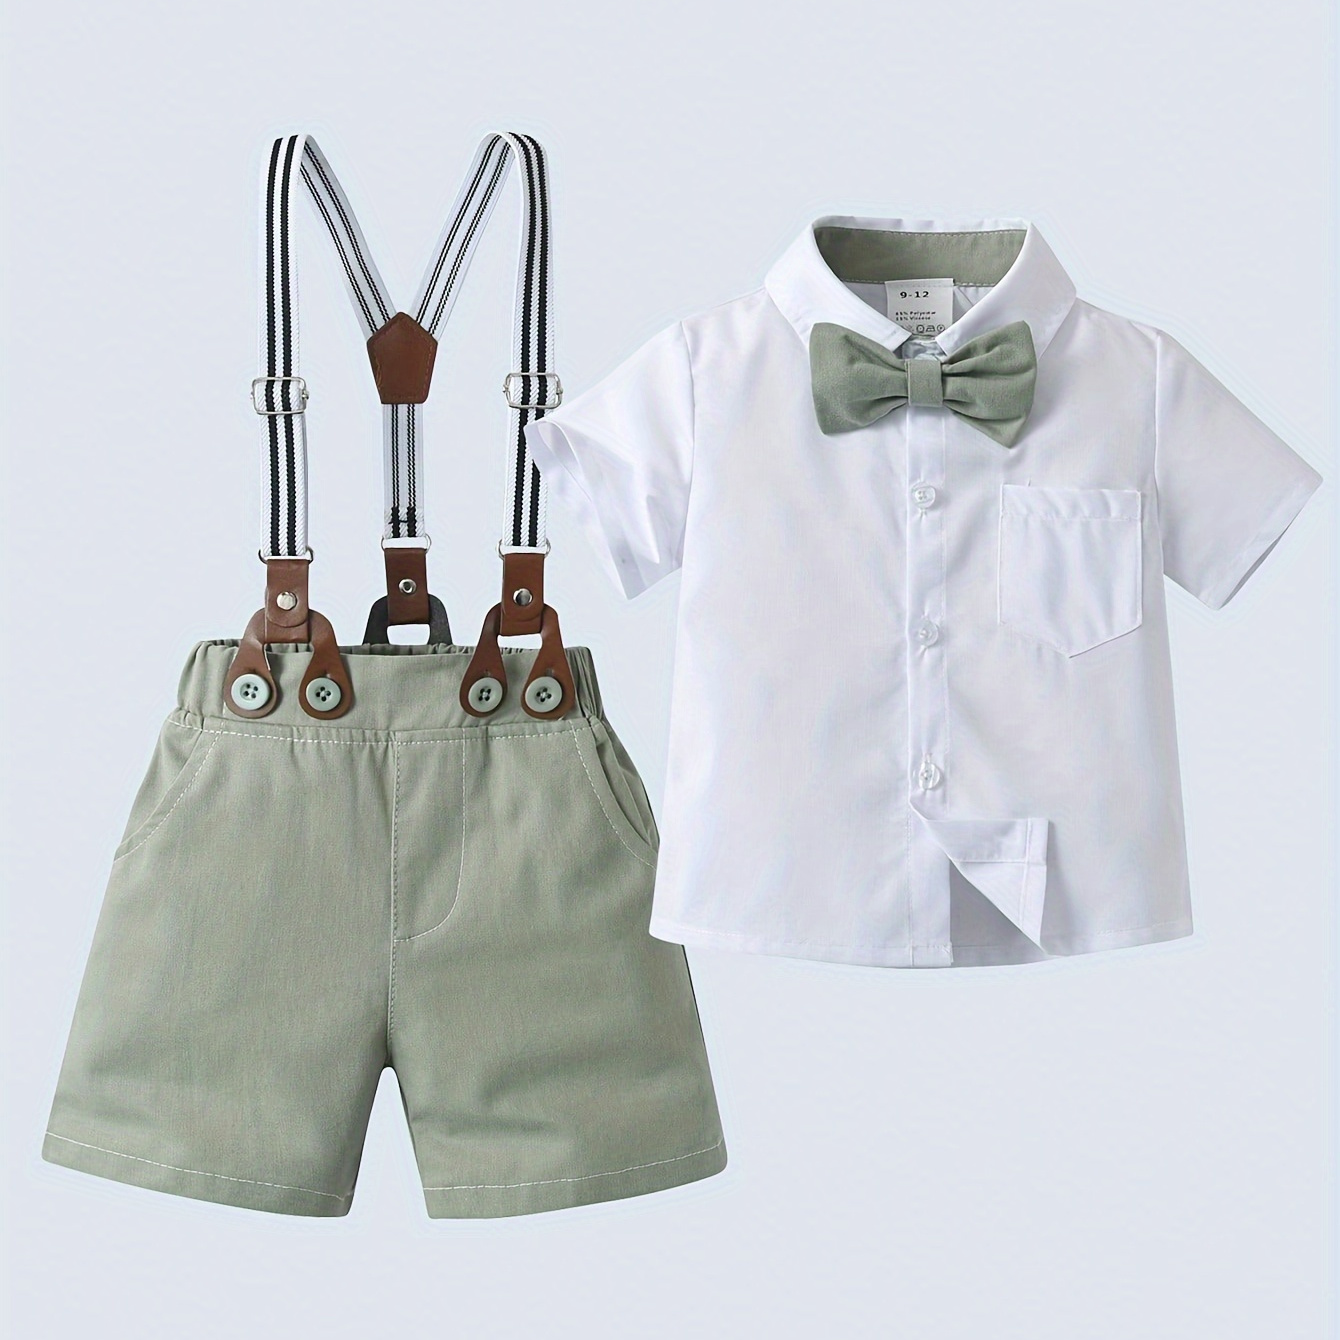 

2pcs Gentleman Outfit For Toddlers, Bowtie Shirt & Green Bib Shorts Set, Formal Wear For Photography Birthday Party, Baby Boy's Clothes